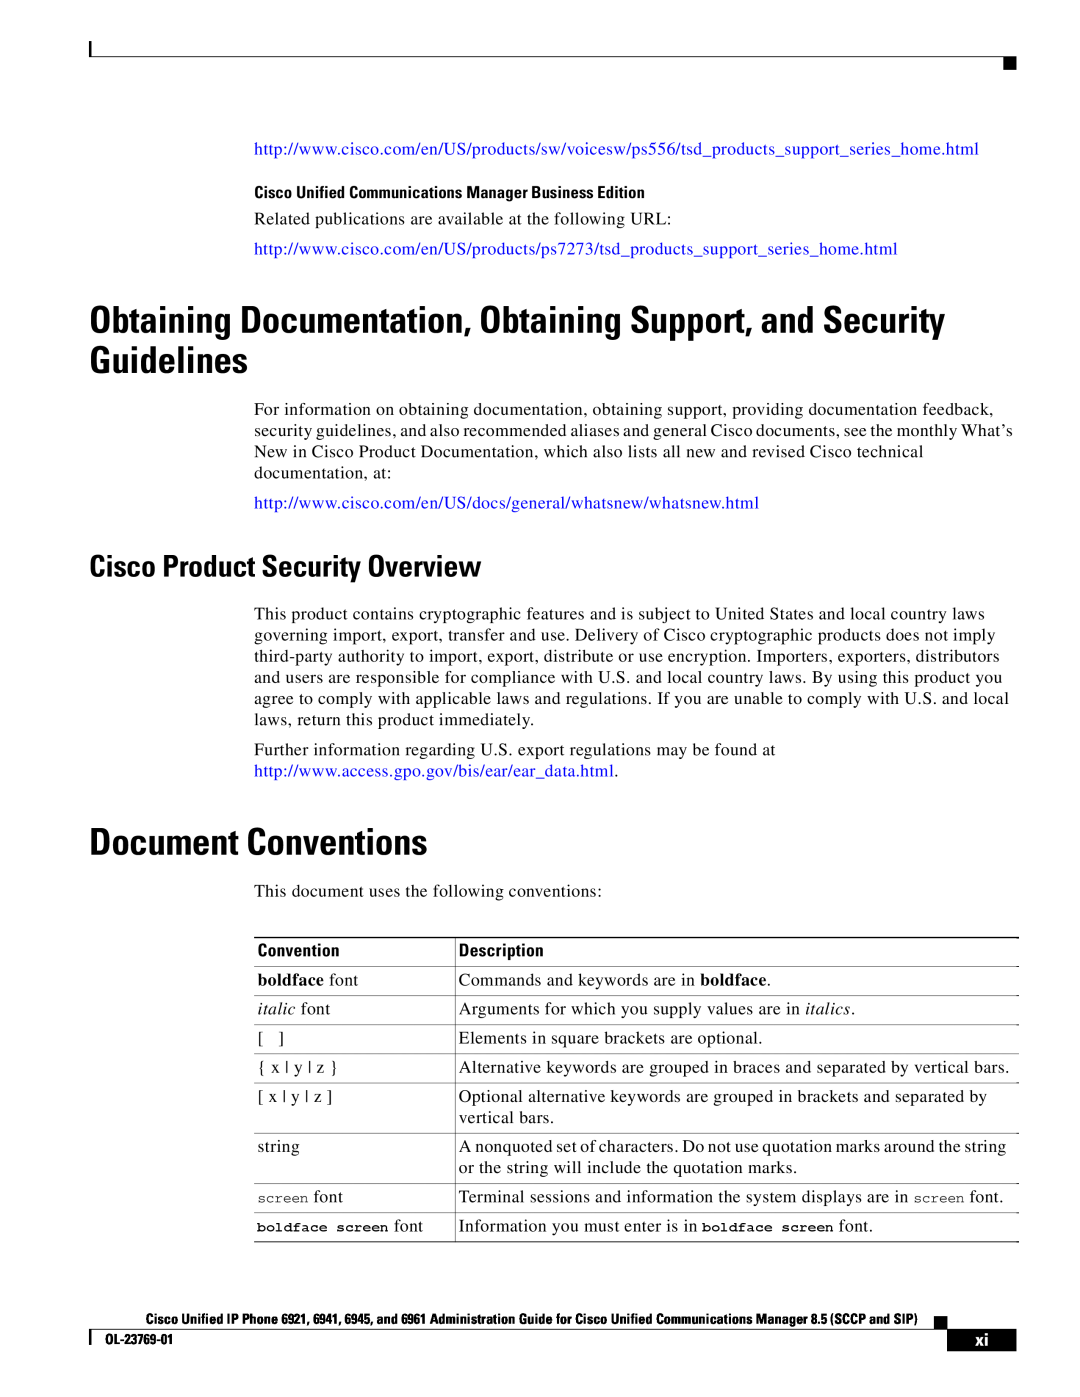 Cisco Systems 6945 Obtaining Documentation, Obtaining Support, and Security Guidelines, Document Conventions, italic font 